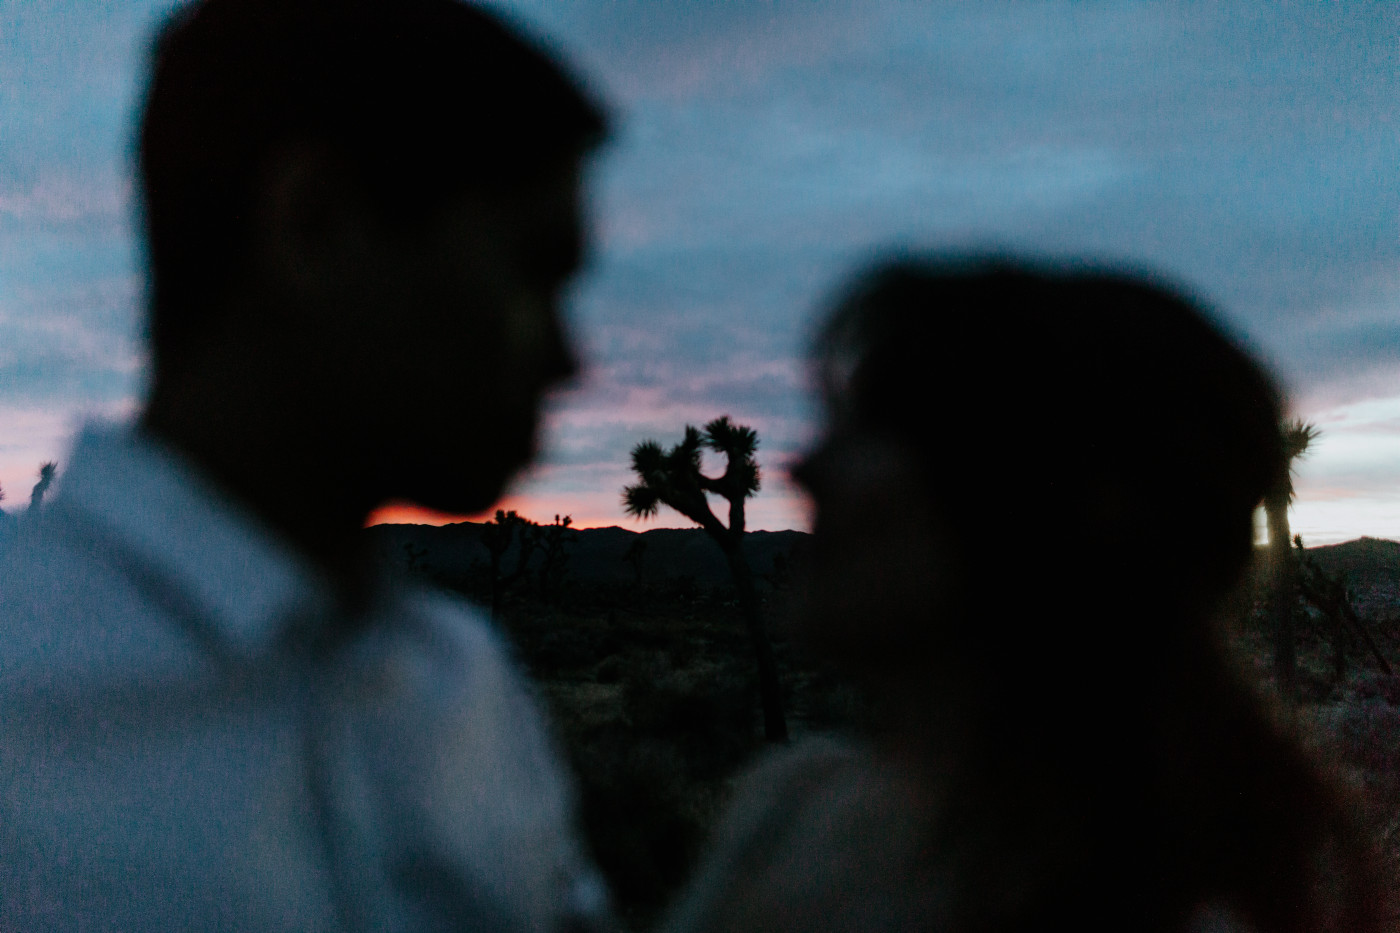 Shelby and Zack stand face to face in Joshua Tree at sunset.